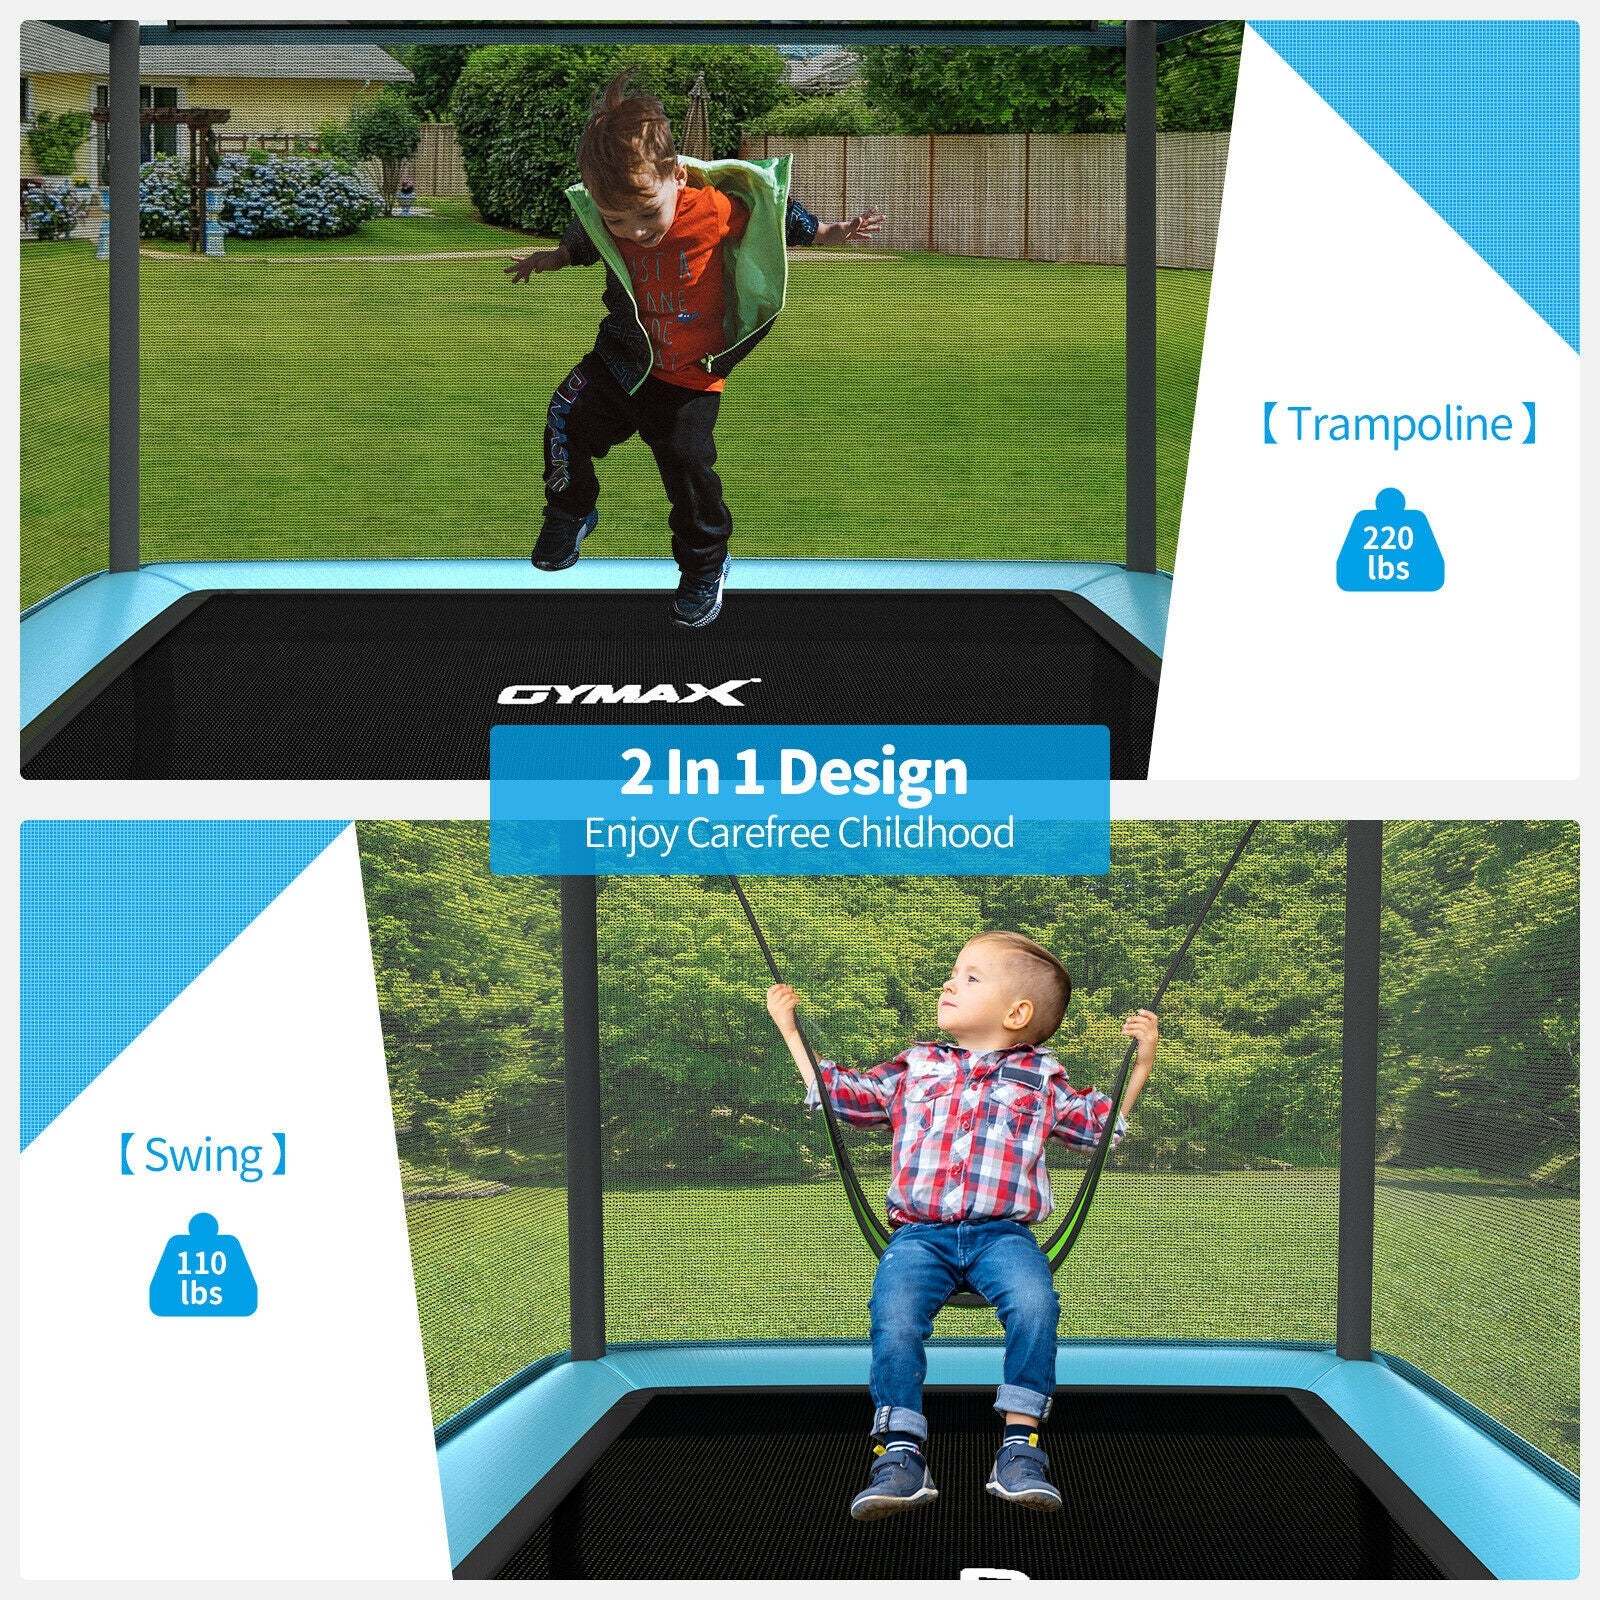 2-in-1 Trampoline and Swing Combo: Unlike traditional trampolines, this kids' trampoline offers the added fun of a swing, providing your child with endless entertainment. This high-quality playset is designed to keep your little one engaged for hours on end.